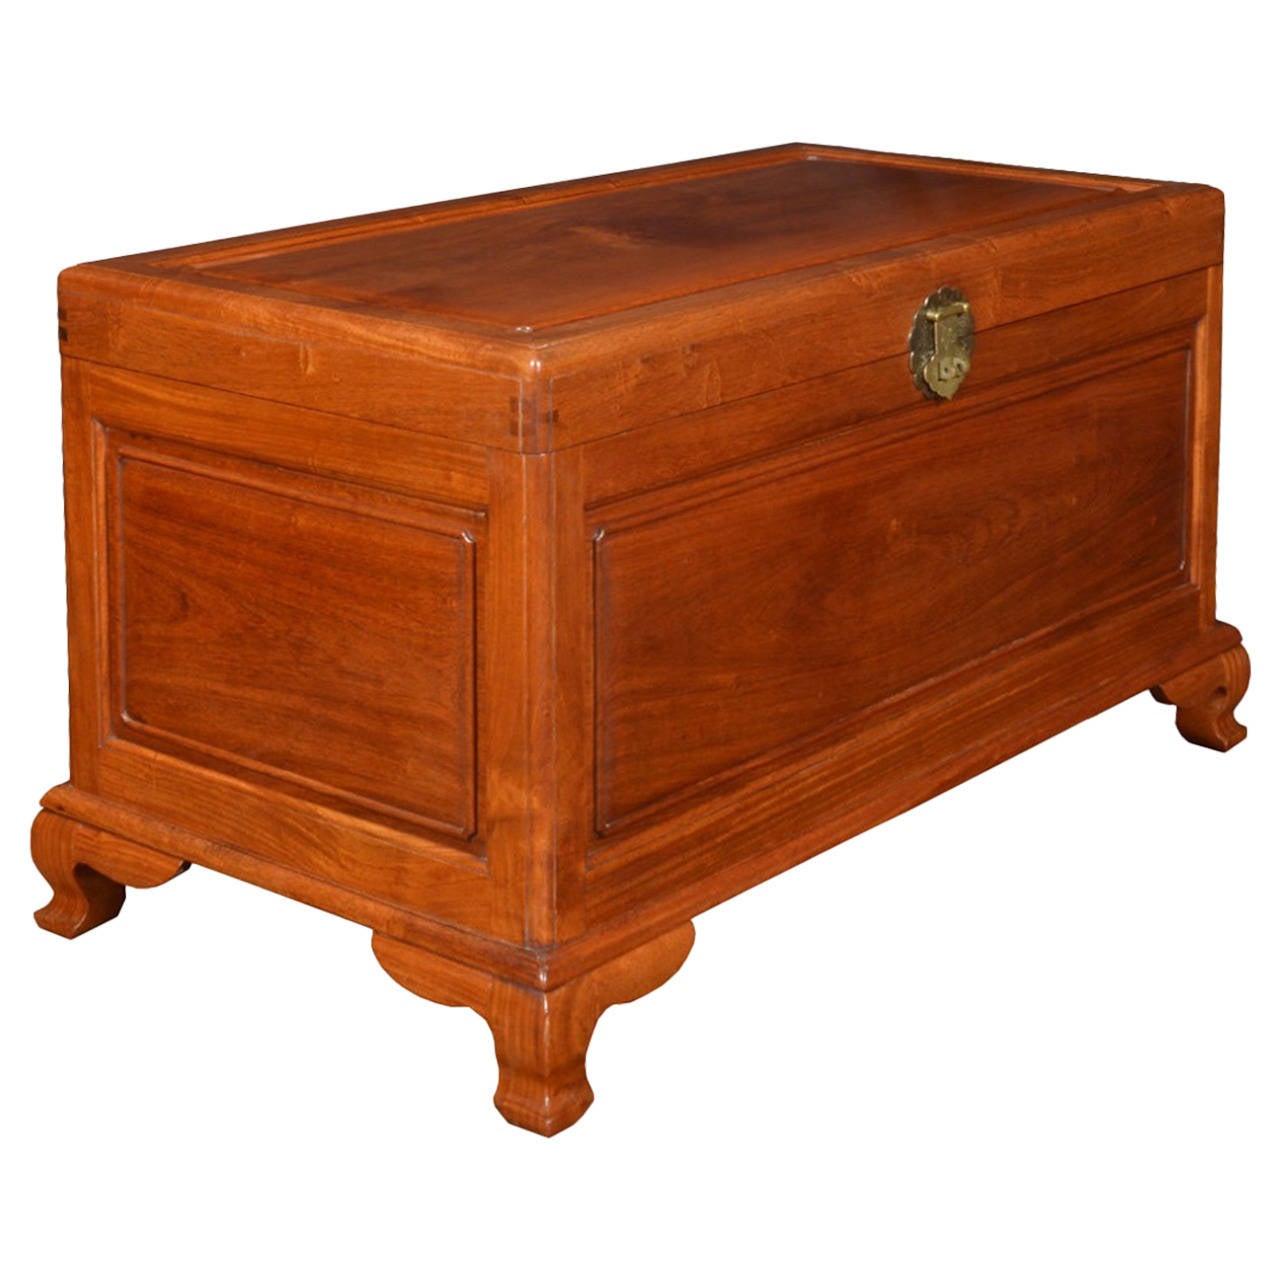 Chinese Export Camphor Wood Trunk Coffee Table For Sale At 1stdibs